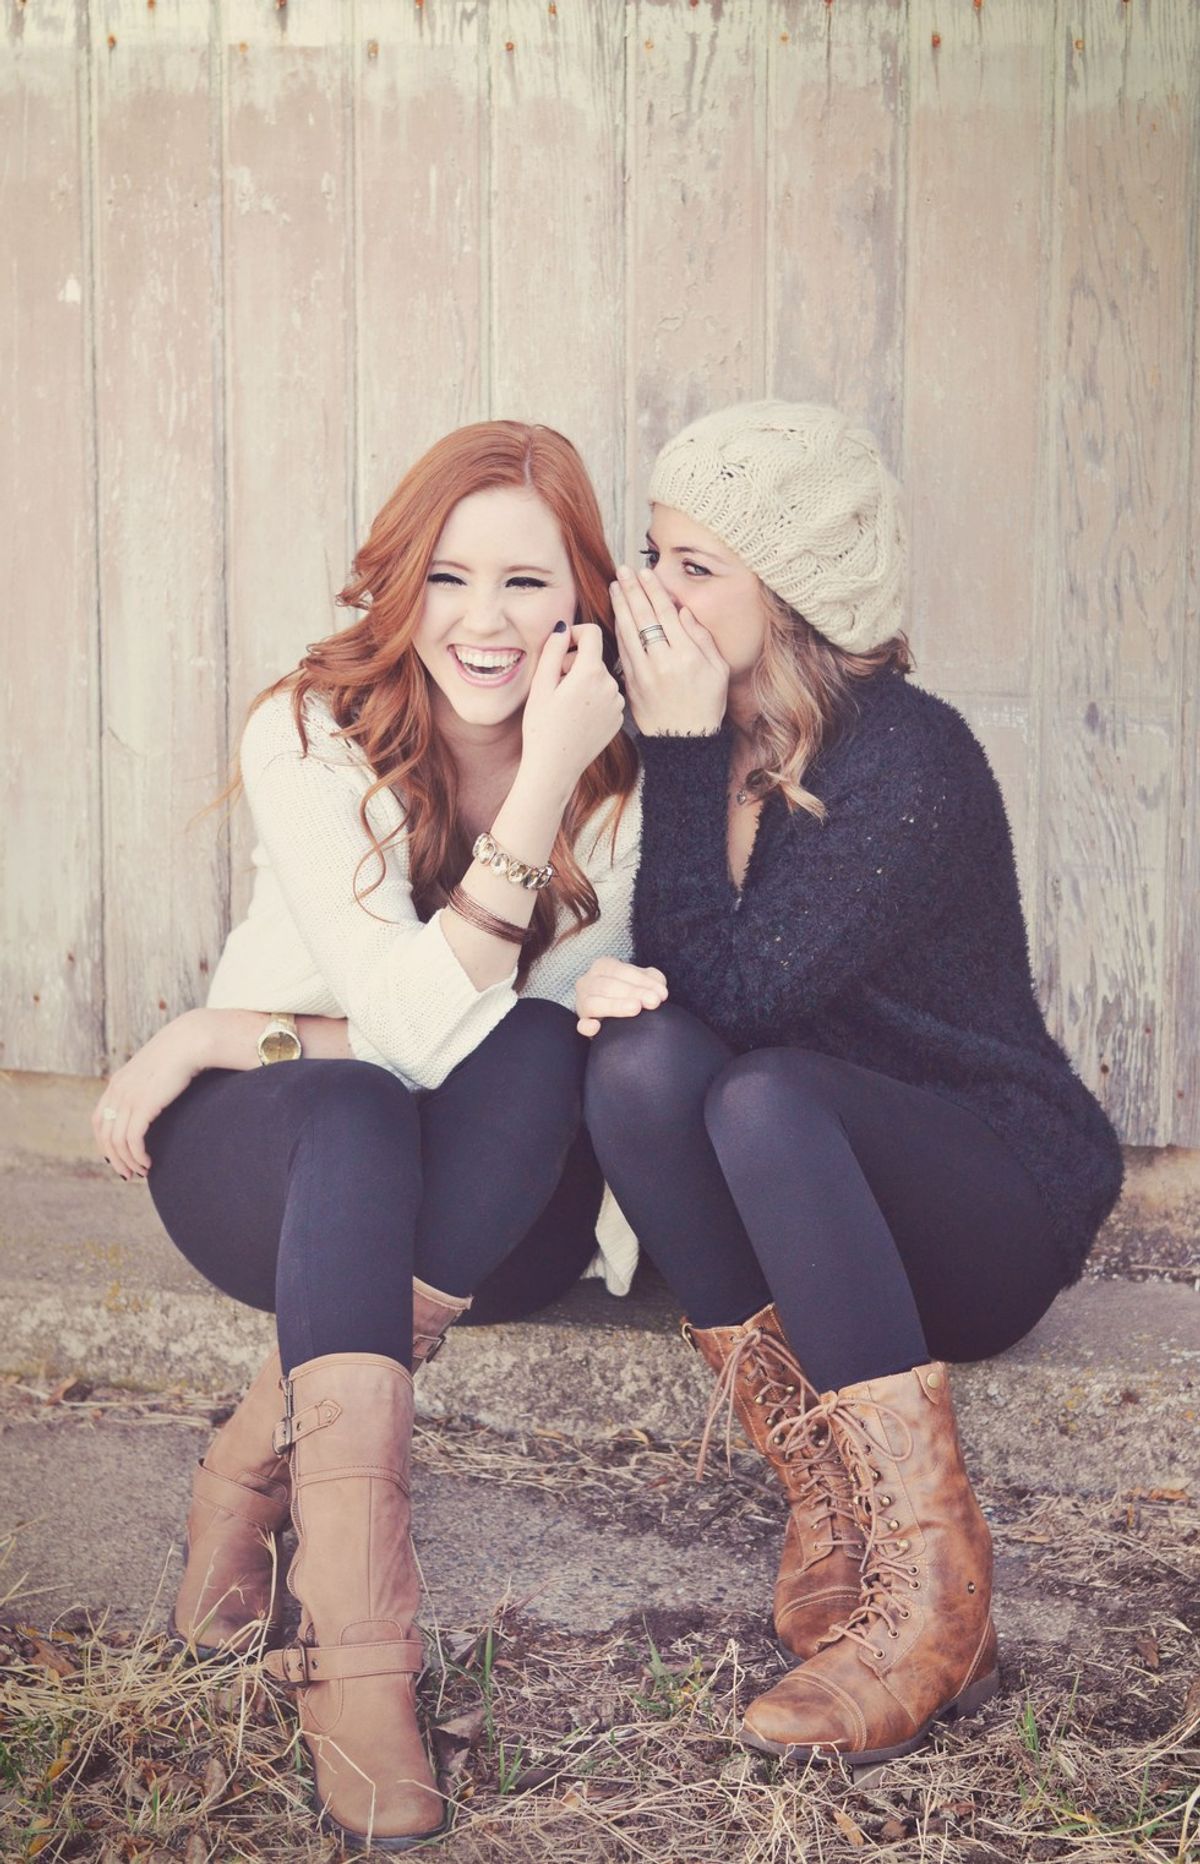 11 Things You Haven't Thanked Your Best Friend For